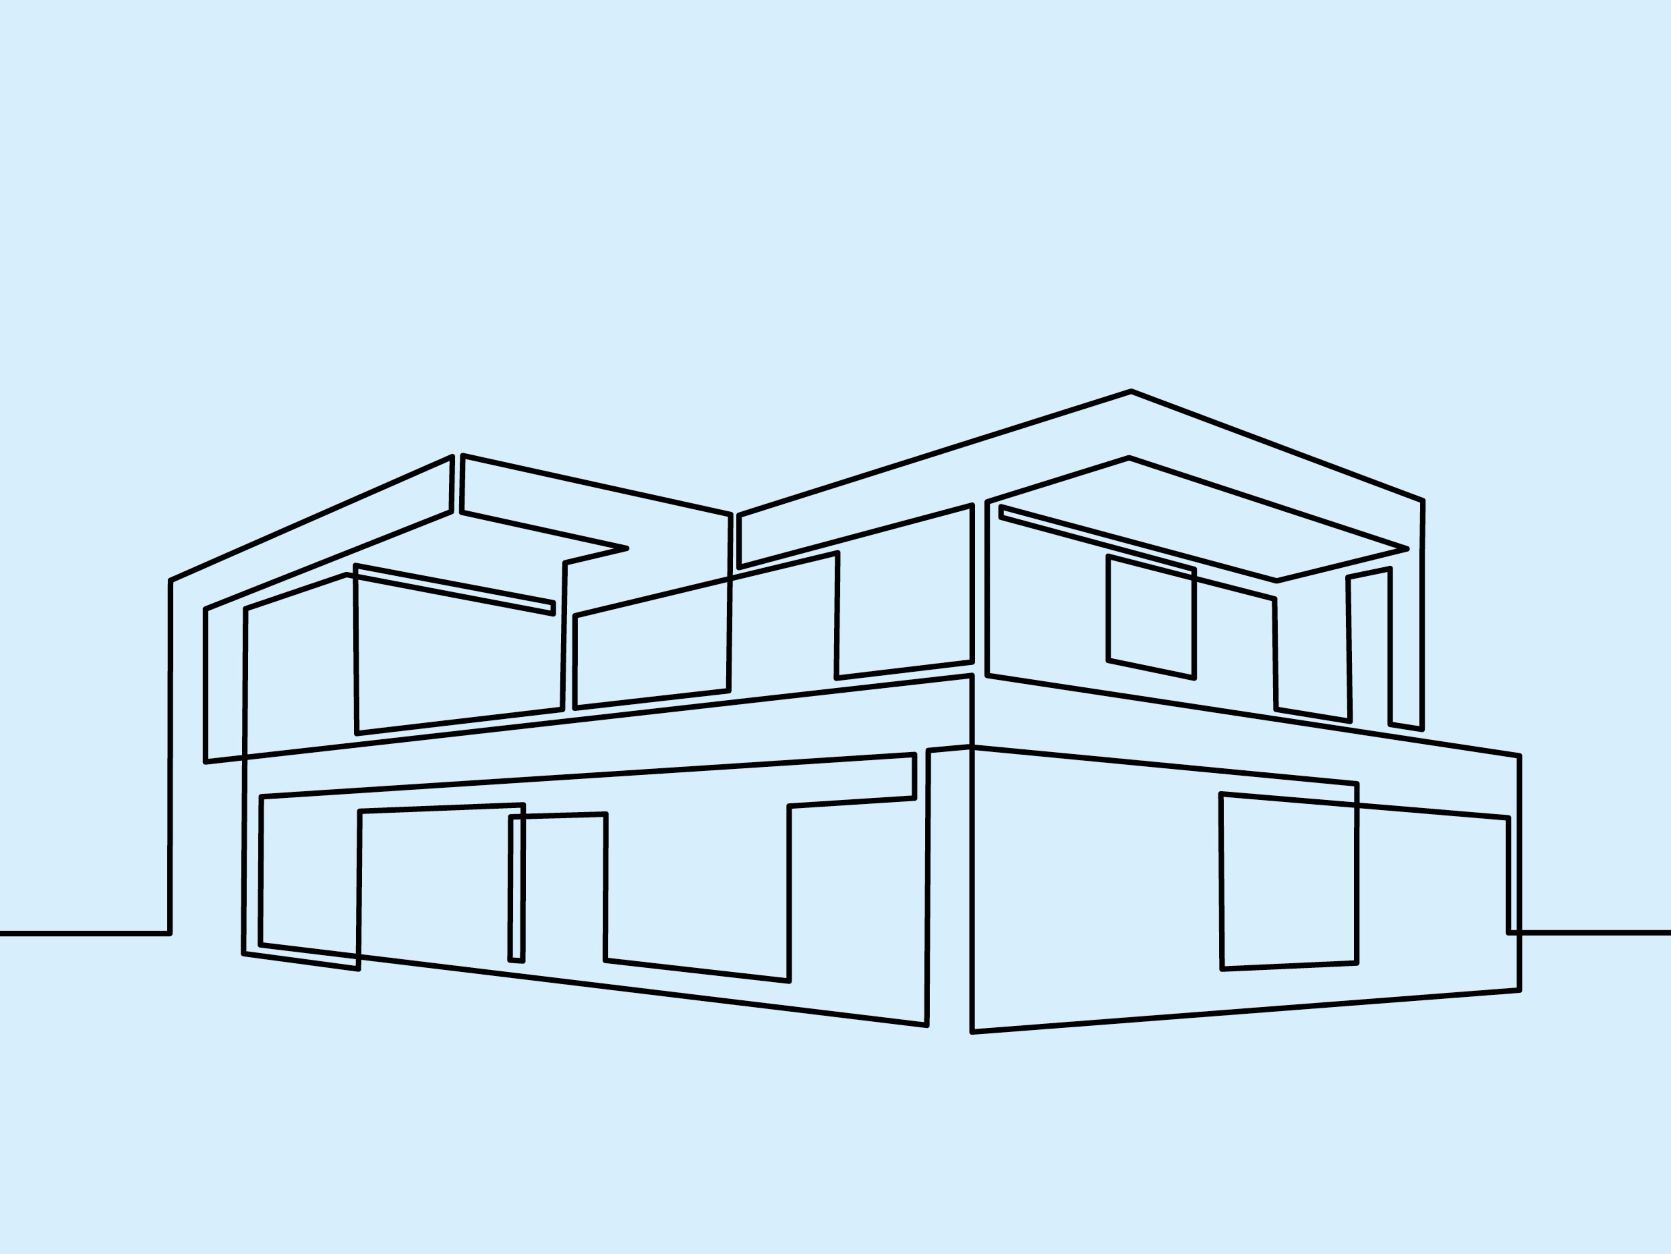 House in outline drawing